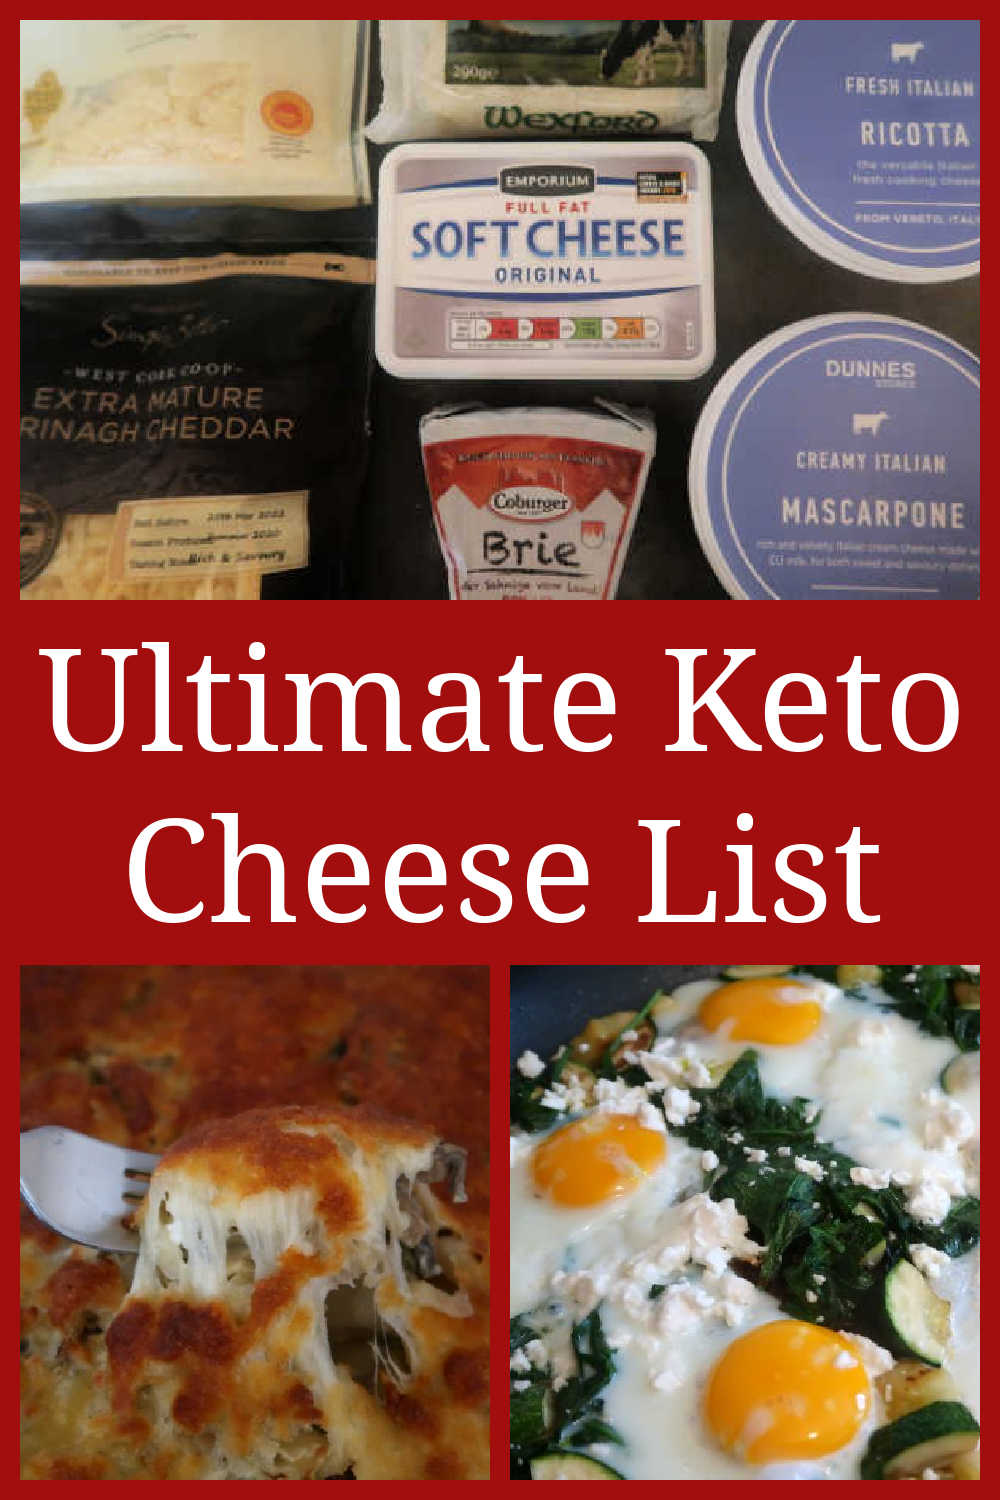 Keto Cheese List - The ultimate guide of cheeses you can eat on a low carb and ketogenic diet - along with the best recipes to enjoy different types of dairy products.